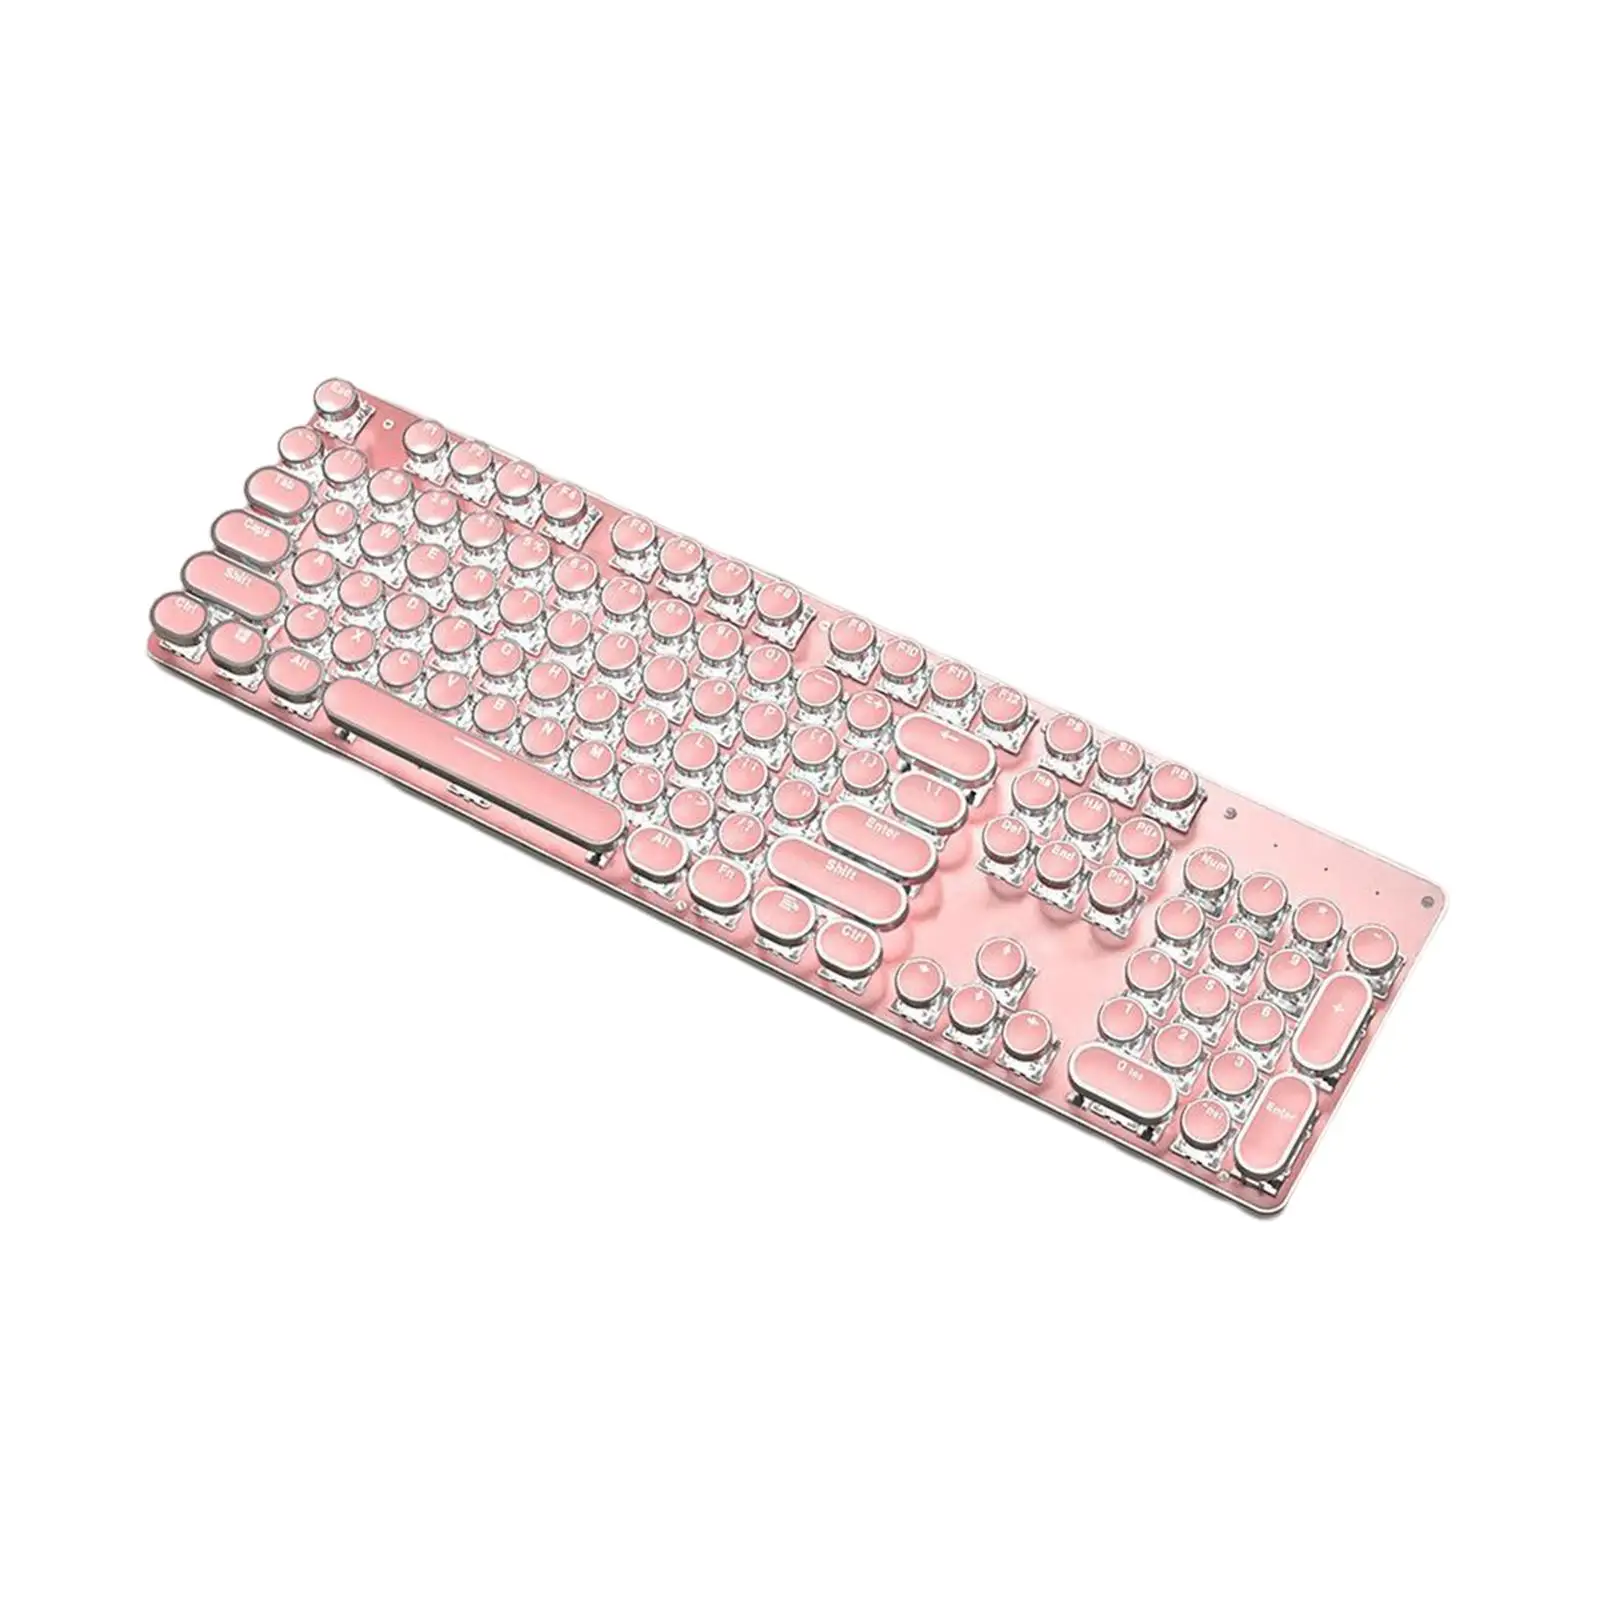 Mechanical Keyboard Brightness Adjustable Typewriter Style Wired RGB Backlit Gaming Keyboard for Laptop PC Gaming and Office Use